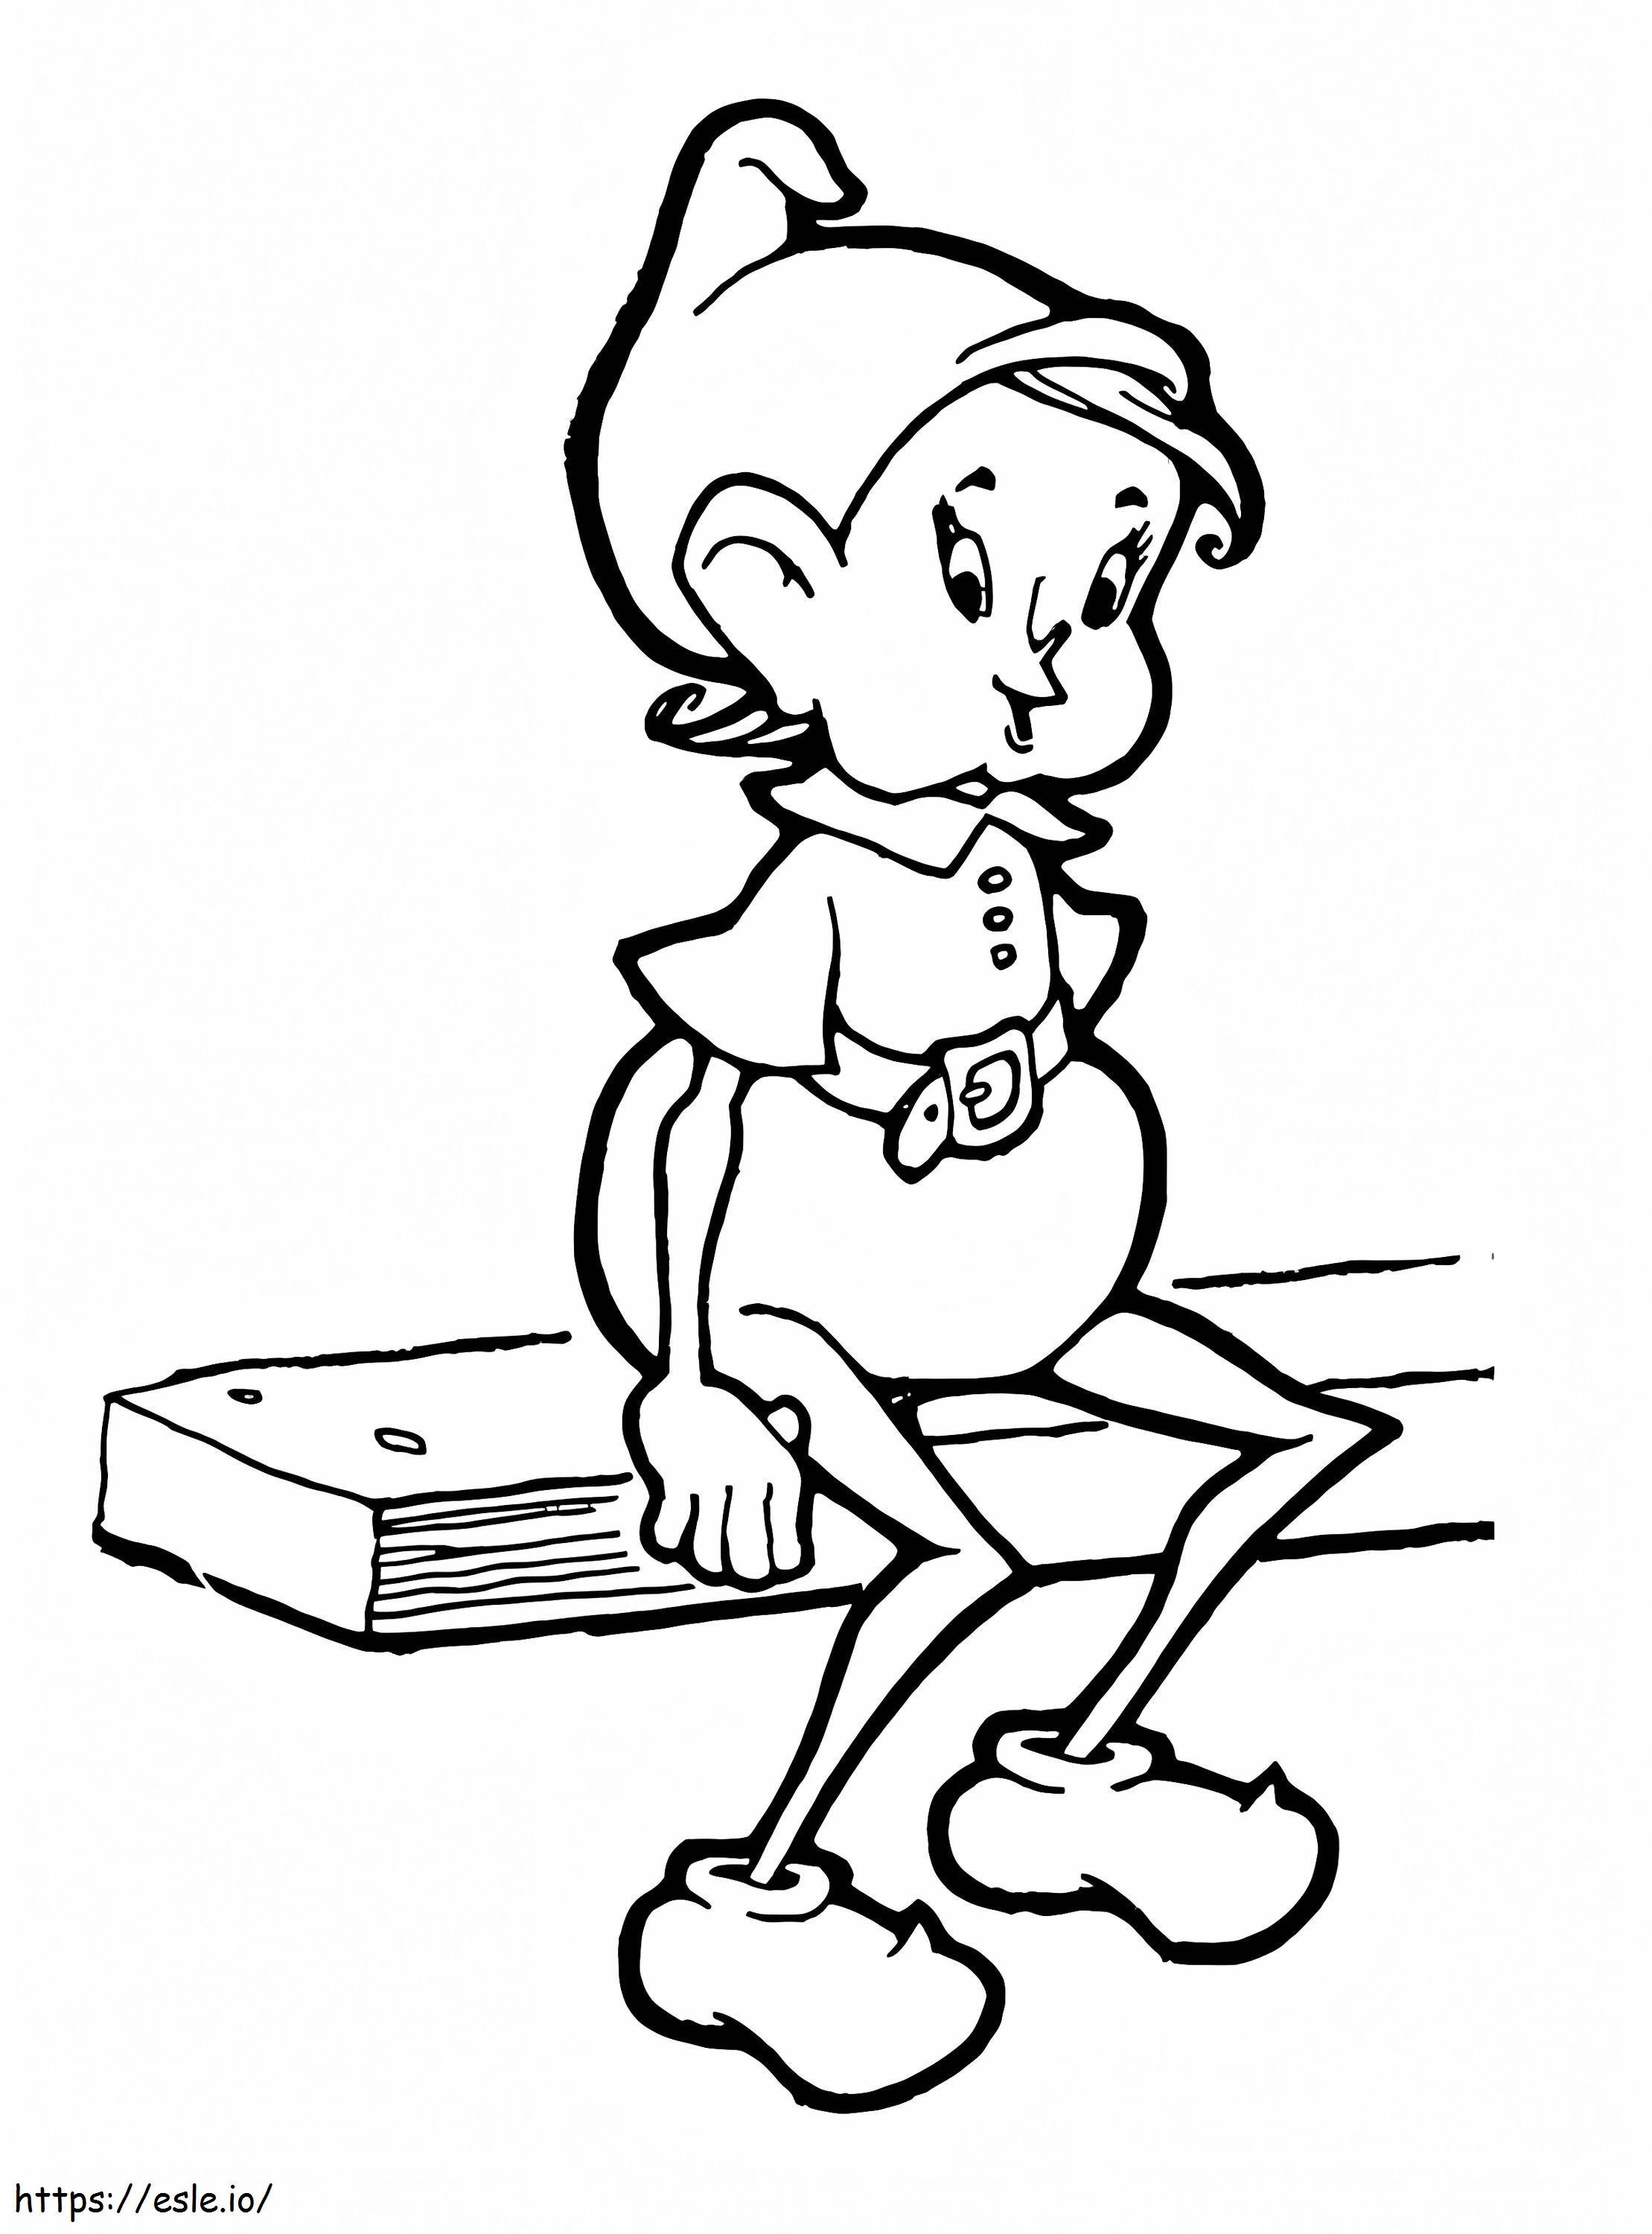 Elf On The Shelf 4 coloring page